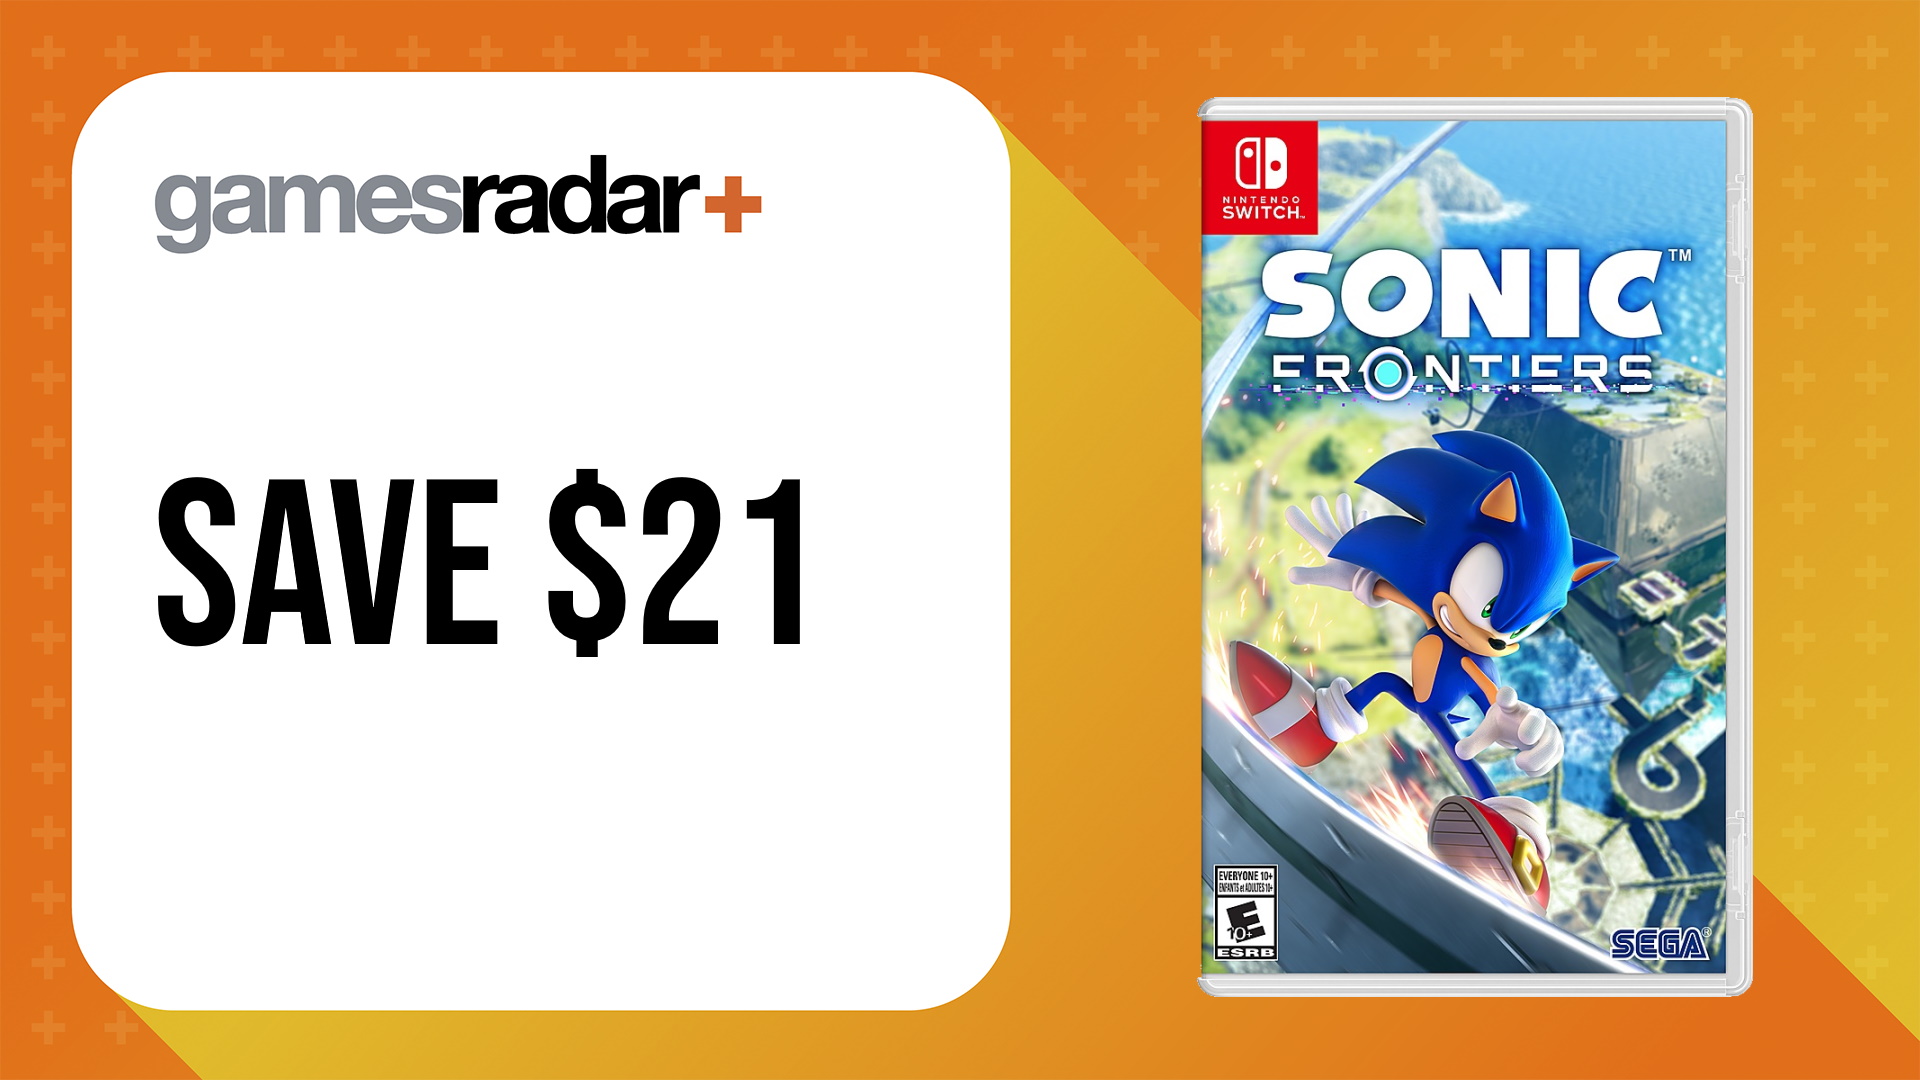 Sonic Frontiers Nintendo Switch box art on orange background with sale price